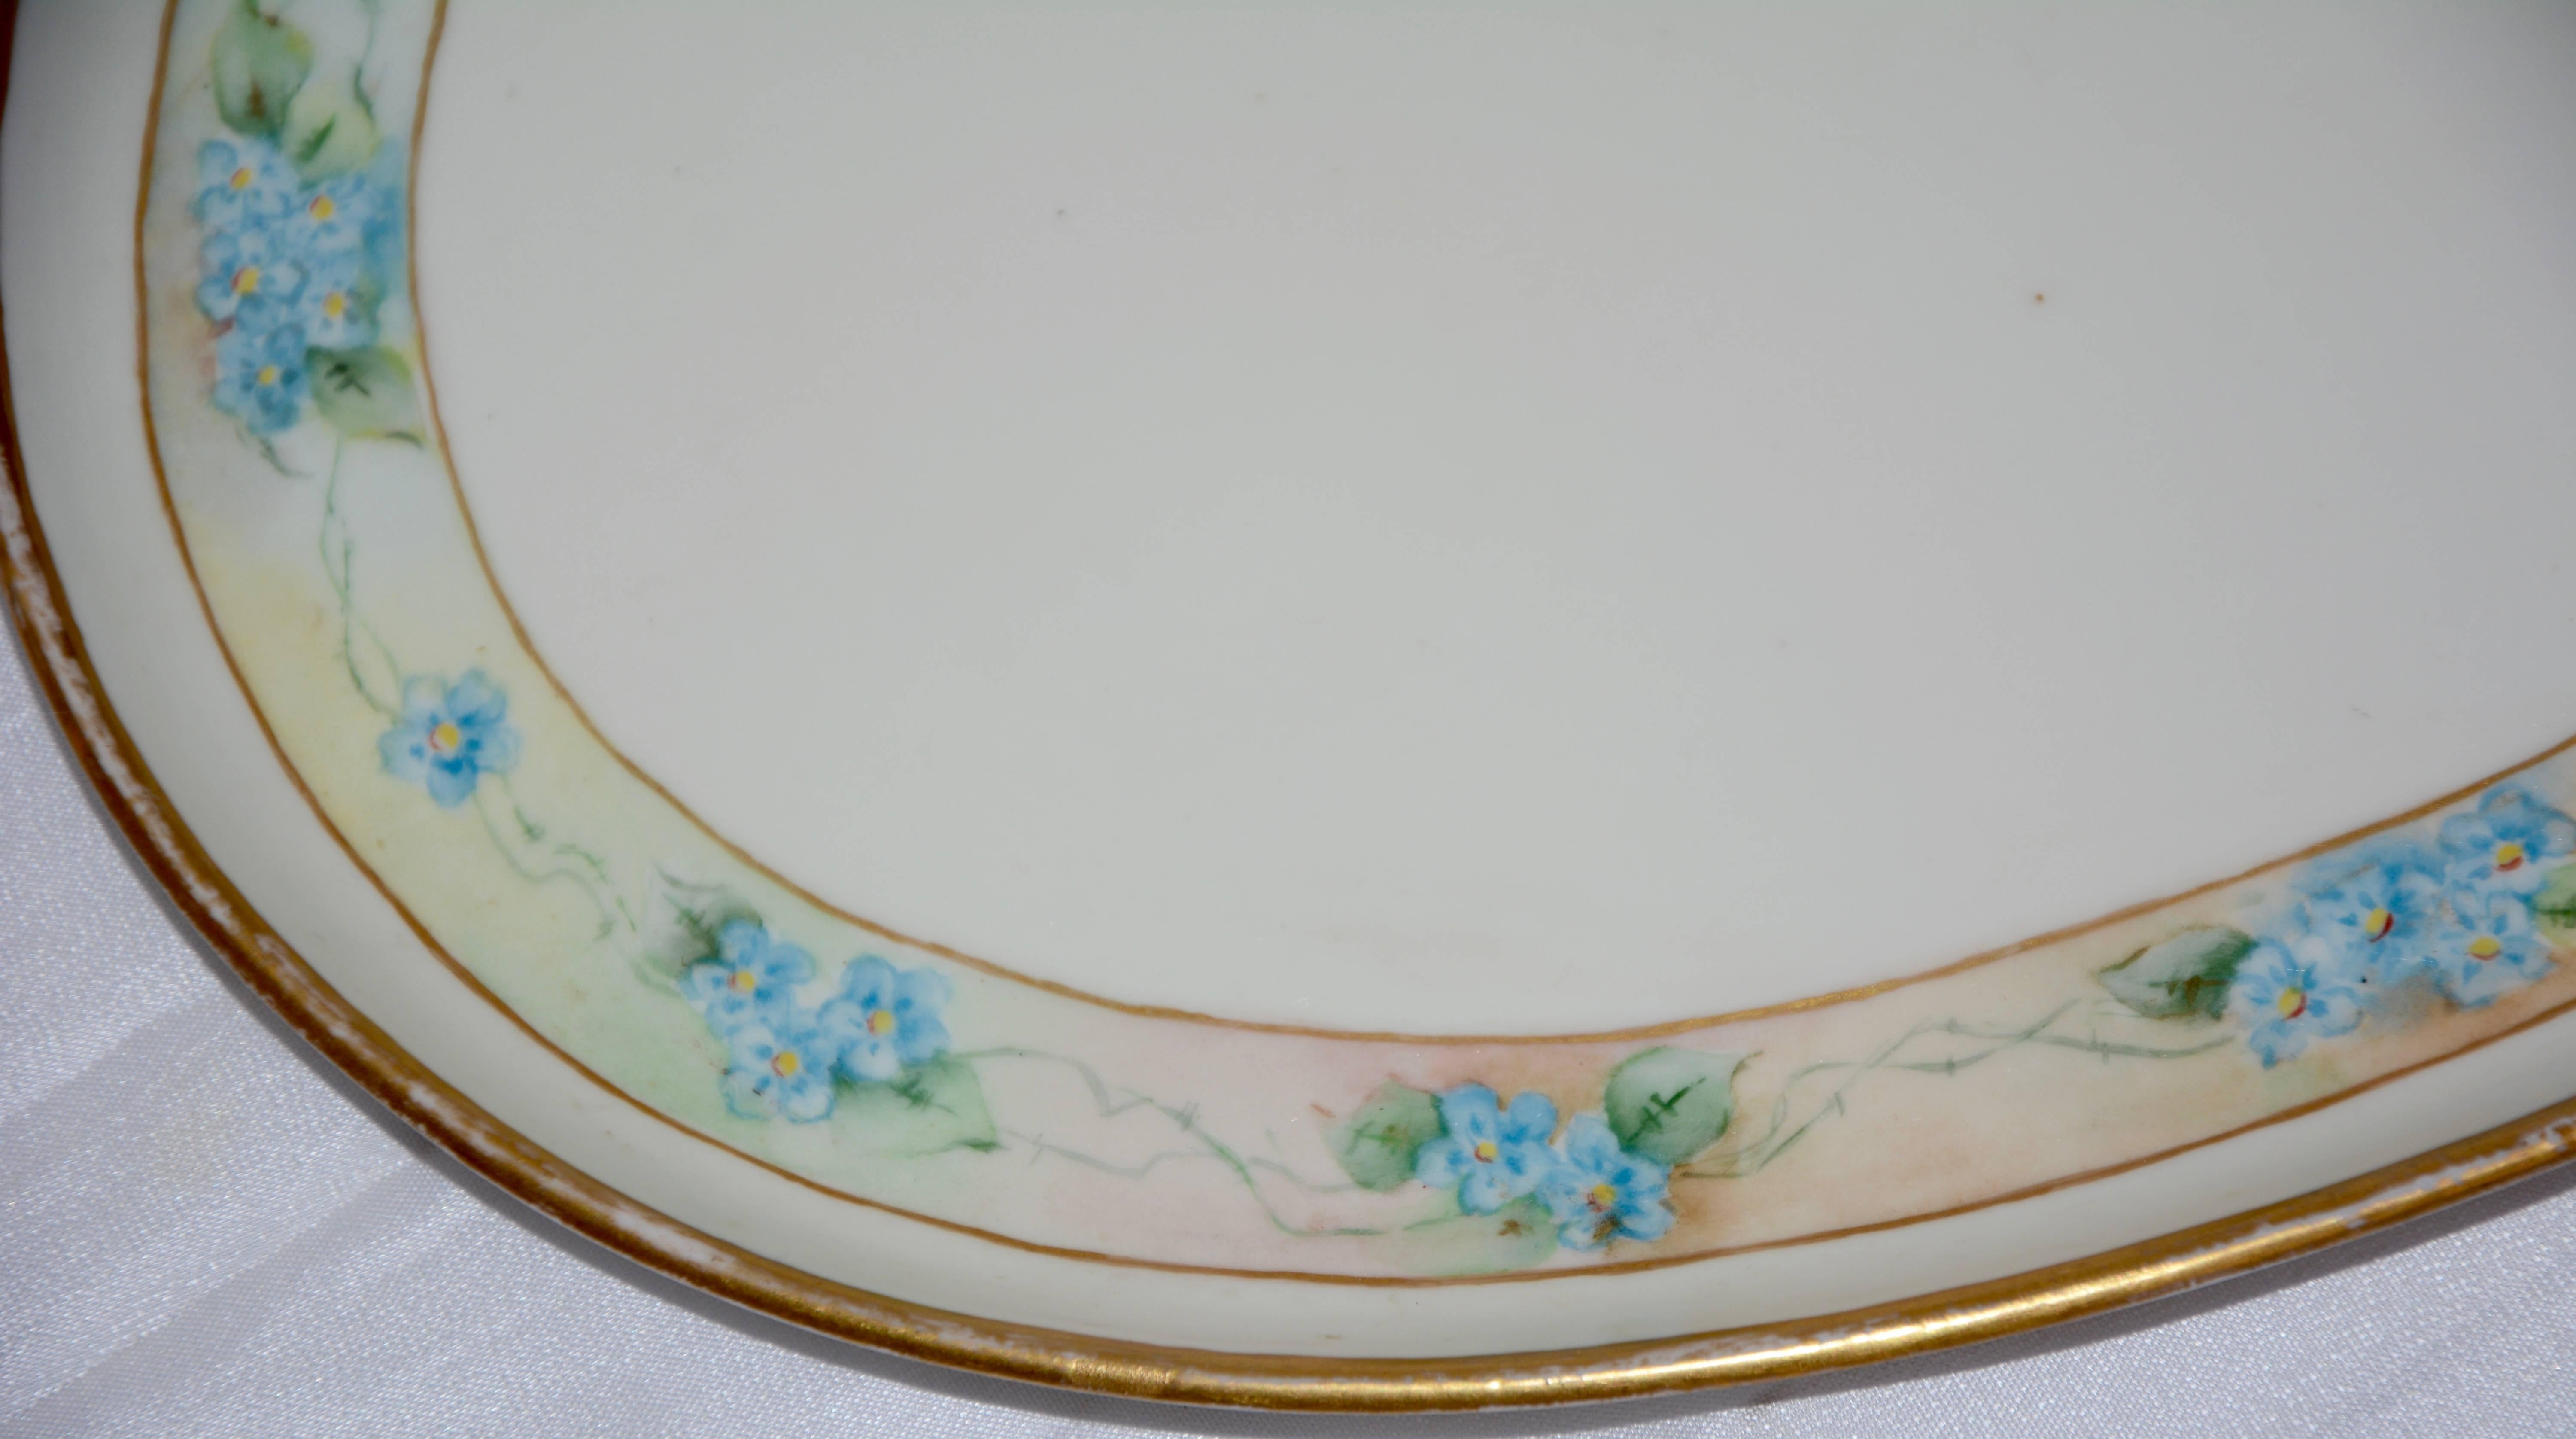 Dainty blue flowers surround the edges of this porcelain platter by Moritz Zdekauer of Austria. The flower garland is bordered in gold as well as the rim. The platter is marked on the back with the M K mark Austria and has been signed by the artist,